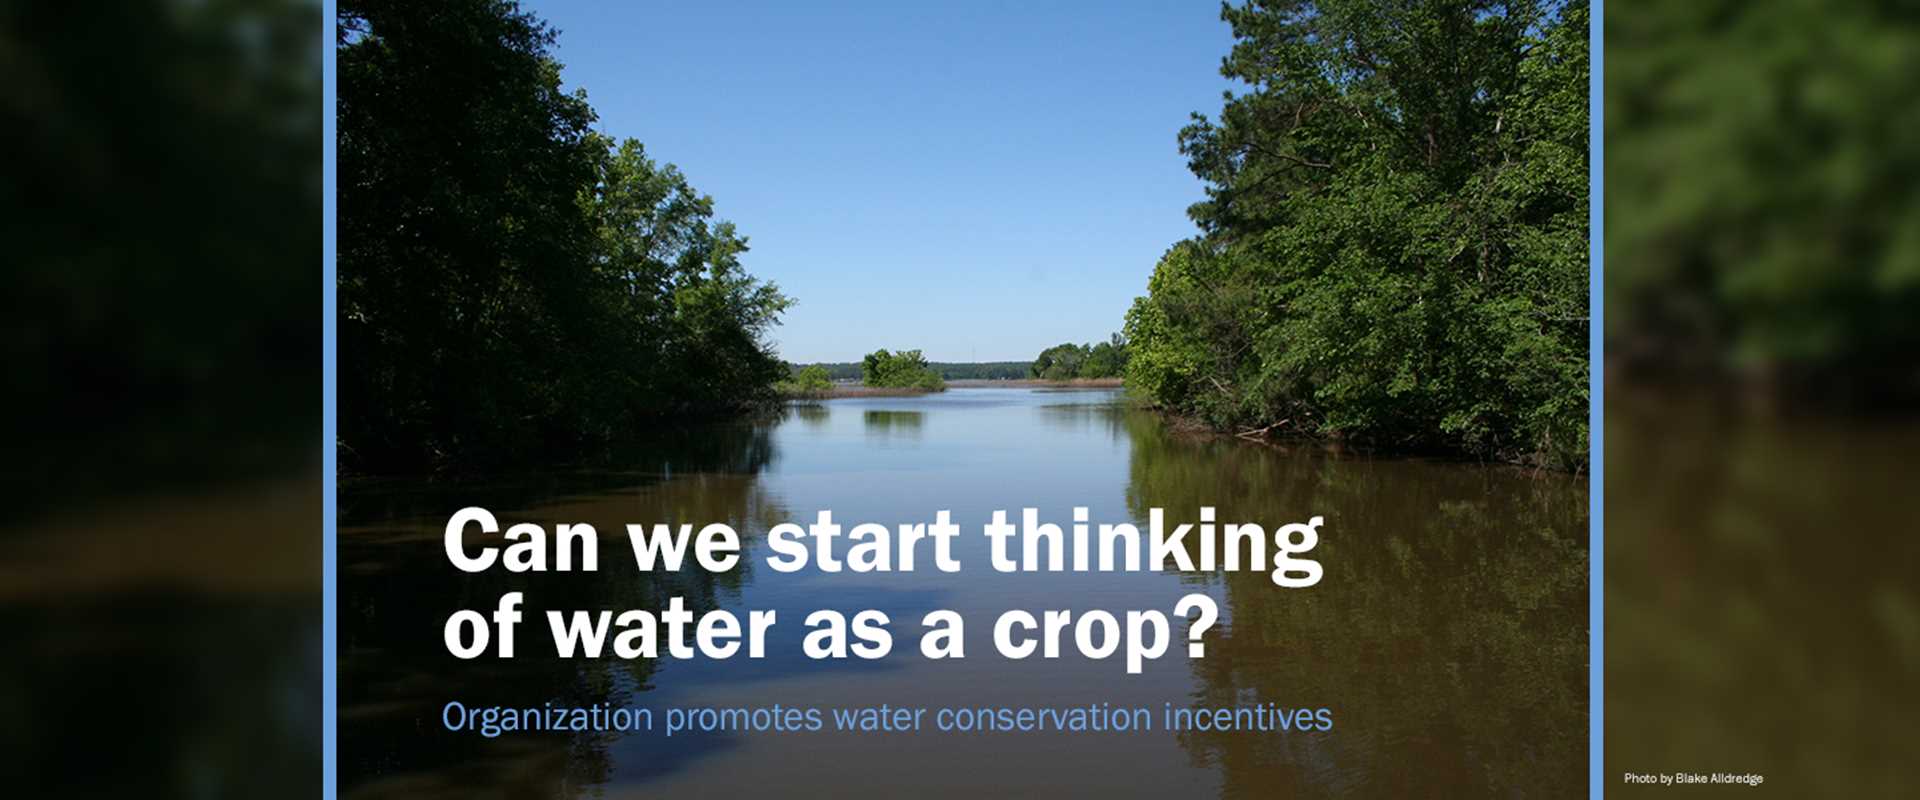 Can we start thinking of water as a crop?